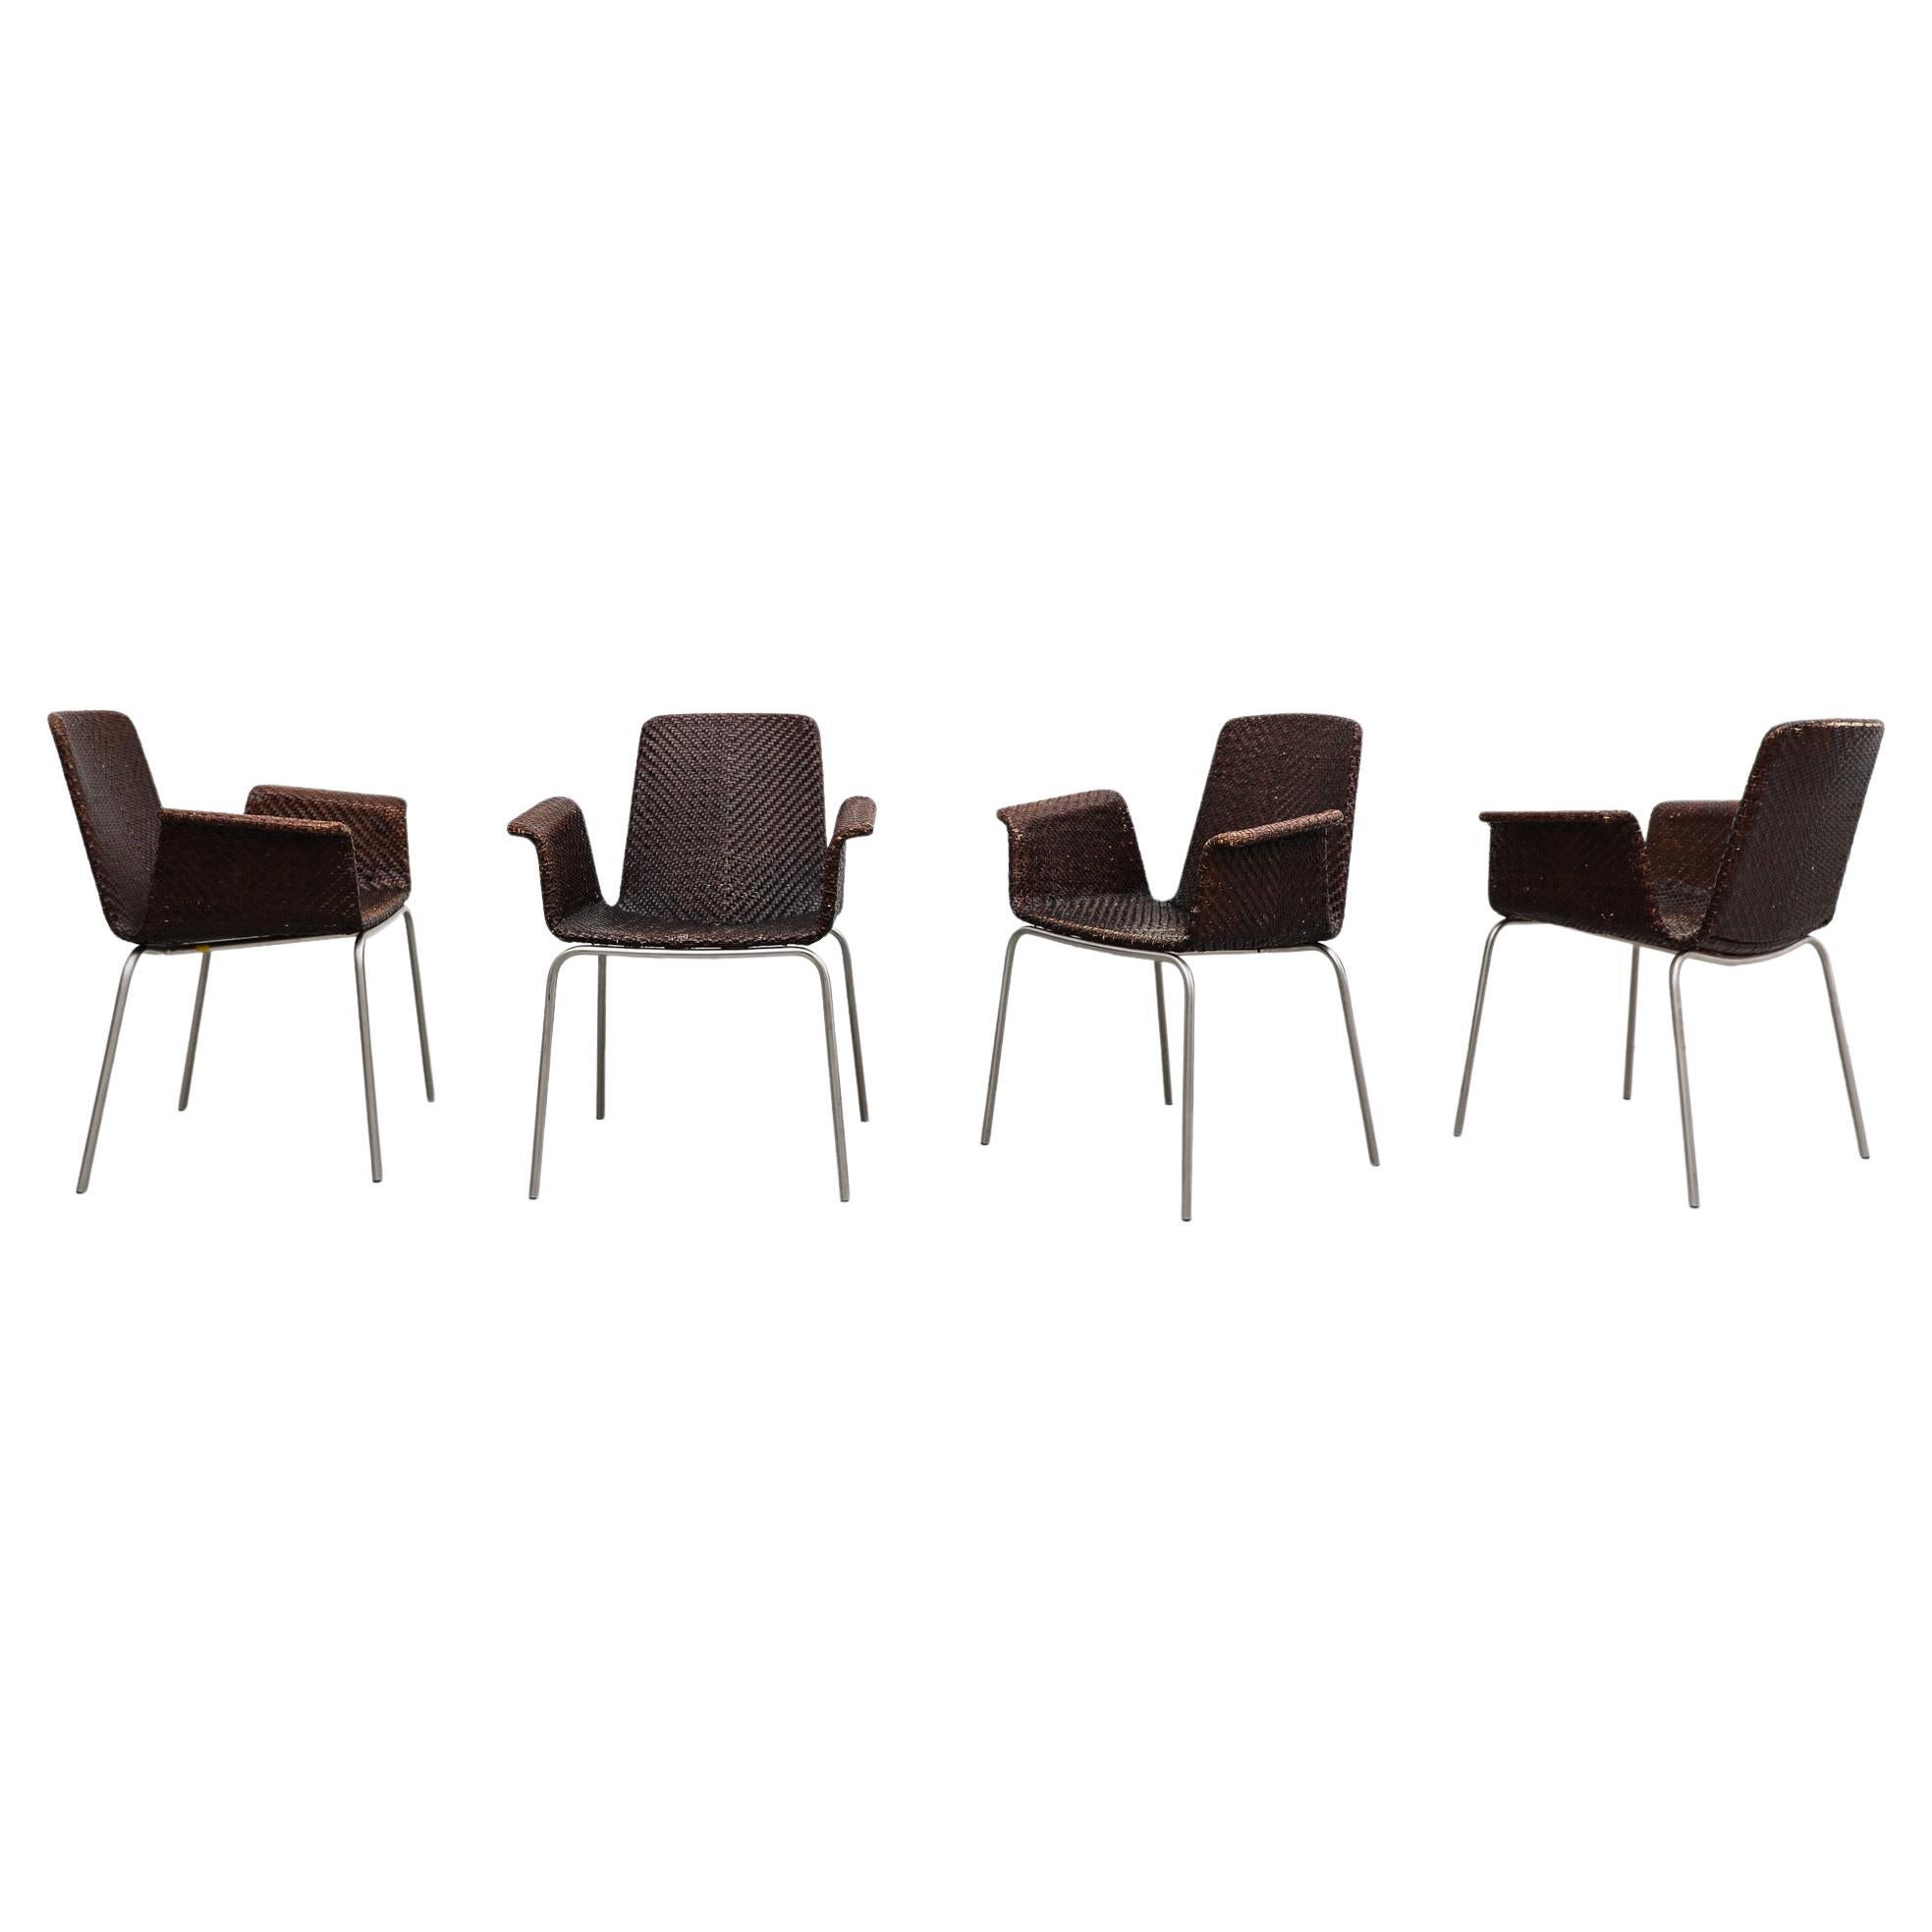 Set of 4 Preben Fabricius Inspired Dark Brown Woven Leather Dining Armchairs For Sale